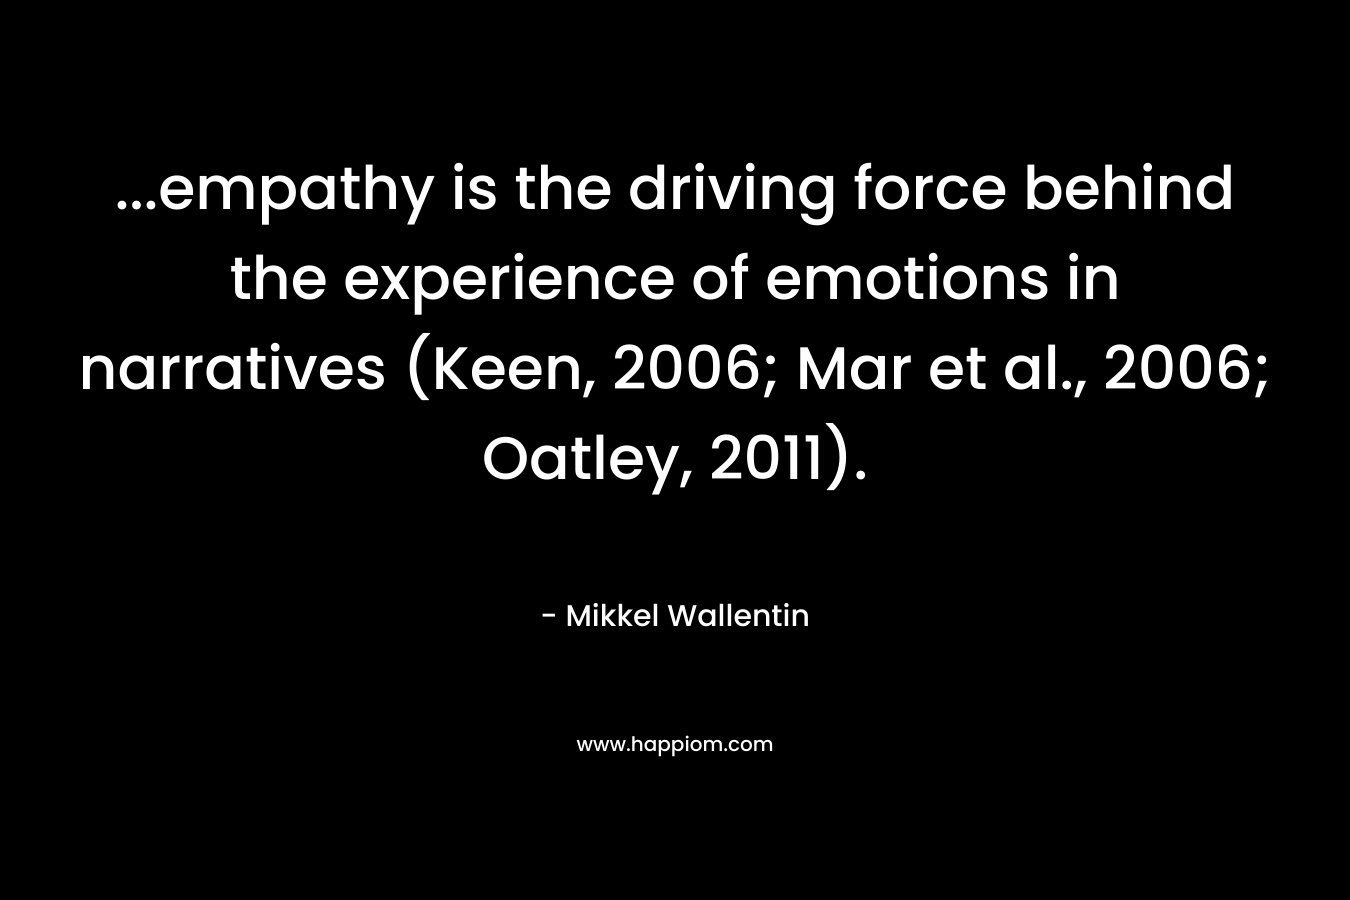 ...empathy is the driving force behind the experience of emotions in narratives (Keen, 2006; Mar et al., 2006; Oatley, 2011).